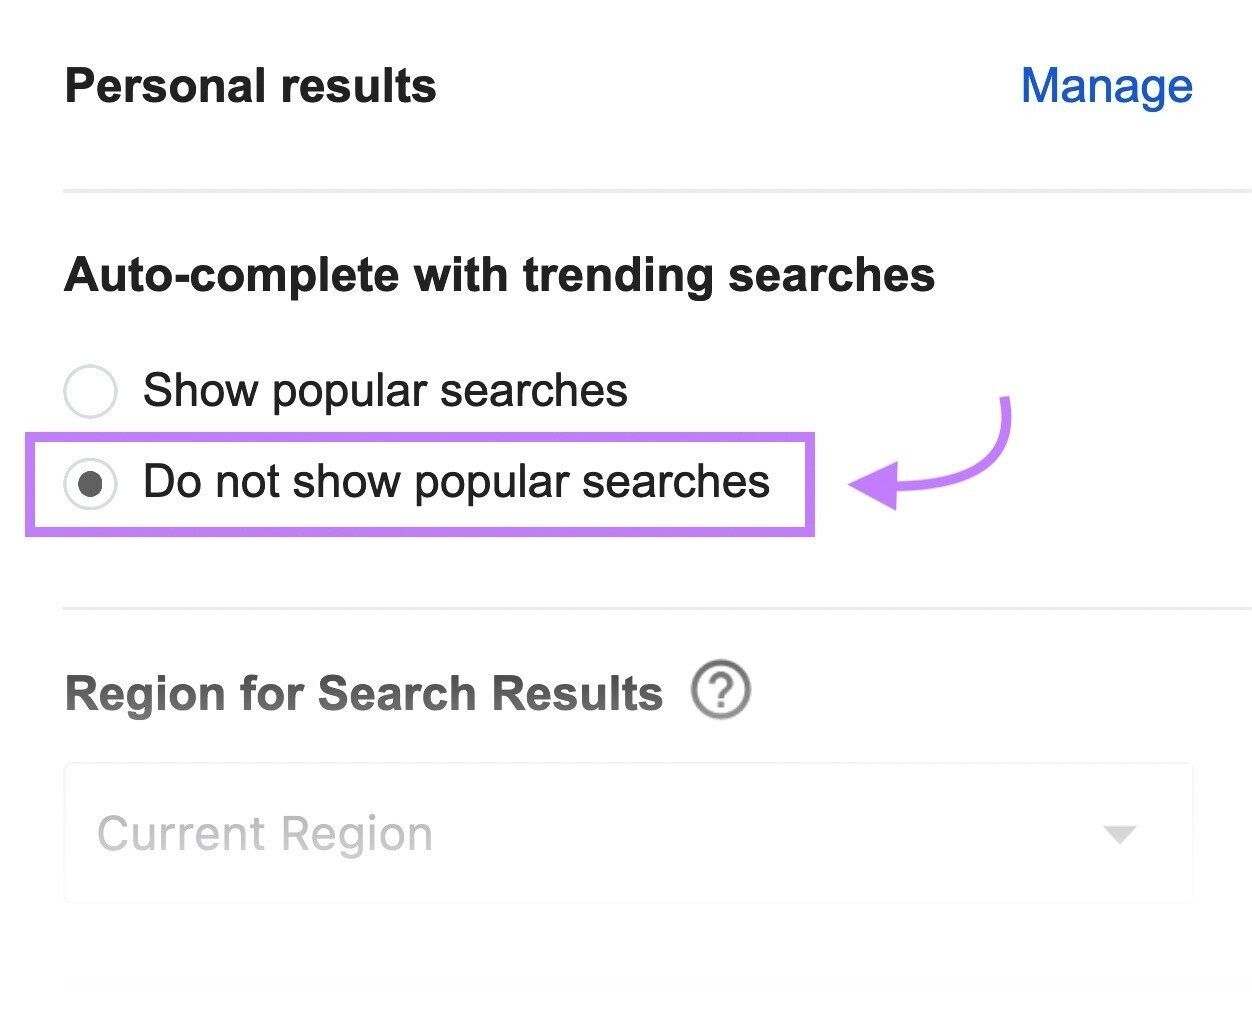 “Auto-complete with trending searches” section